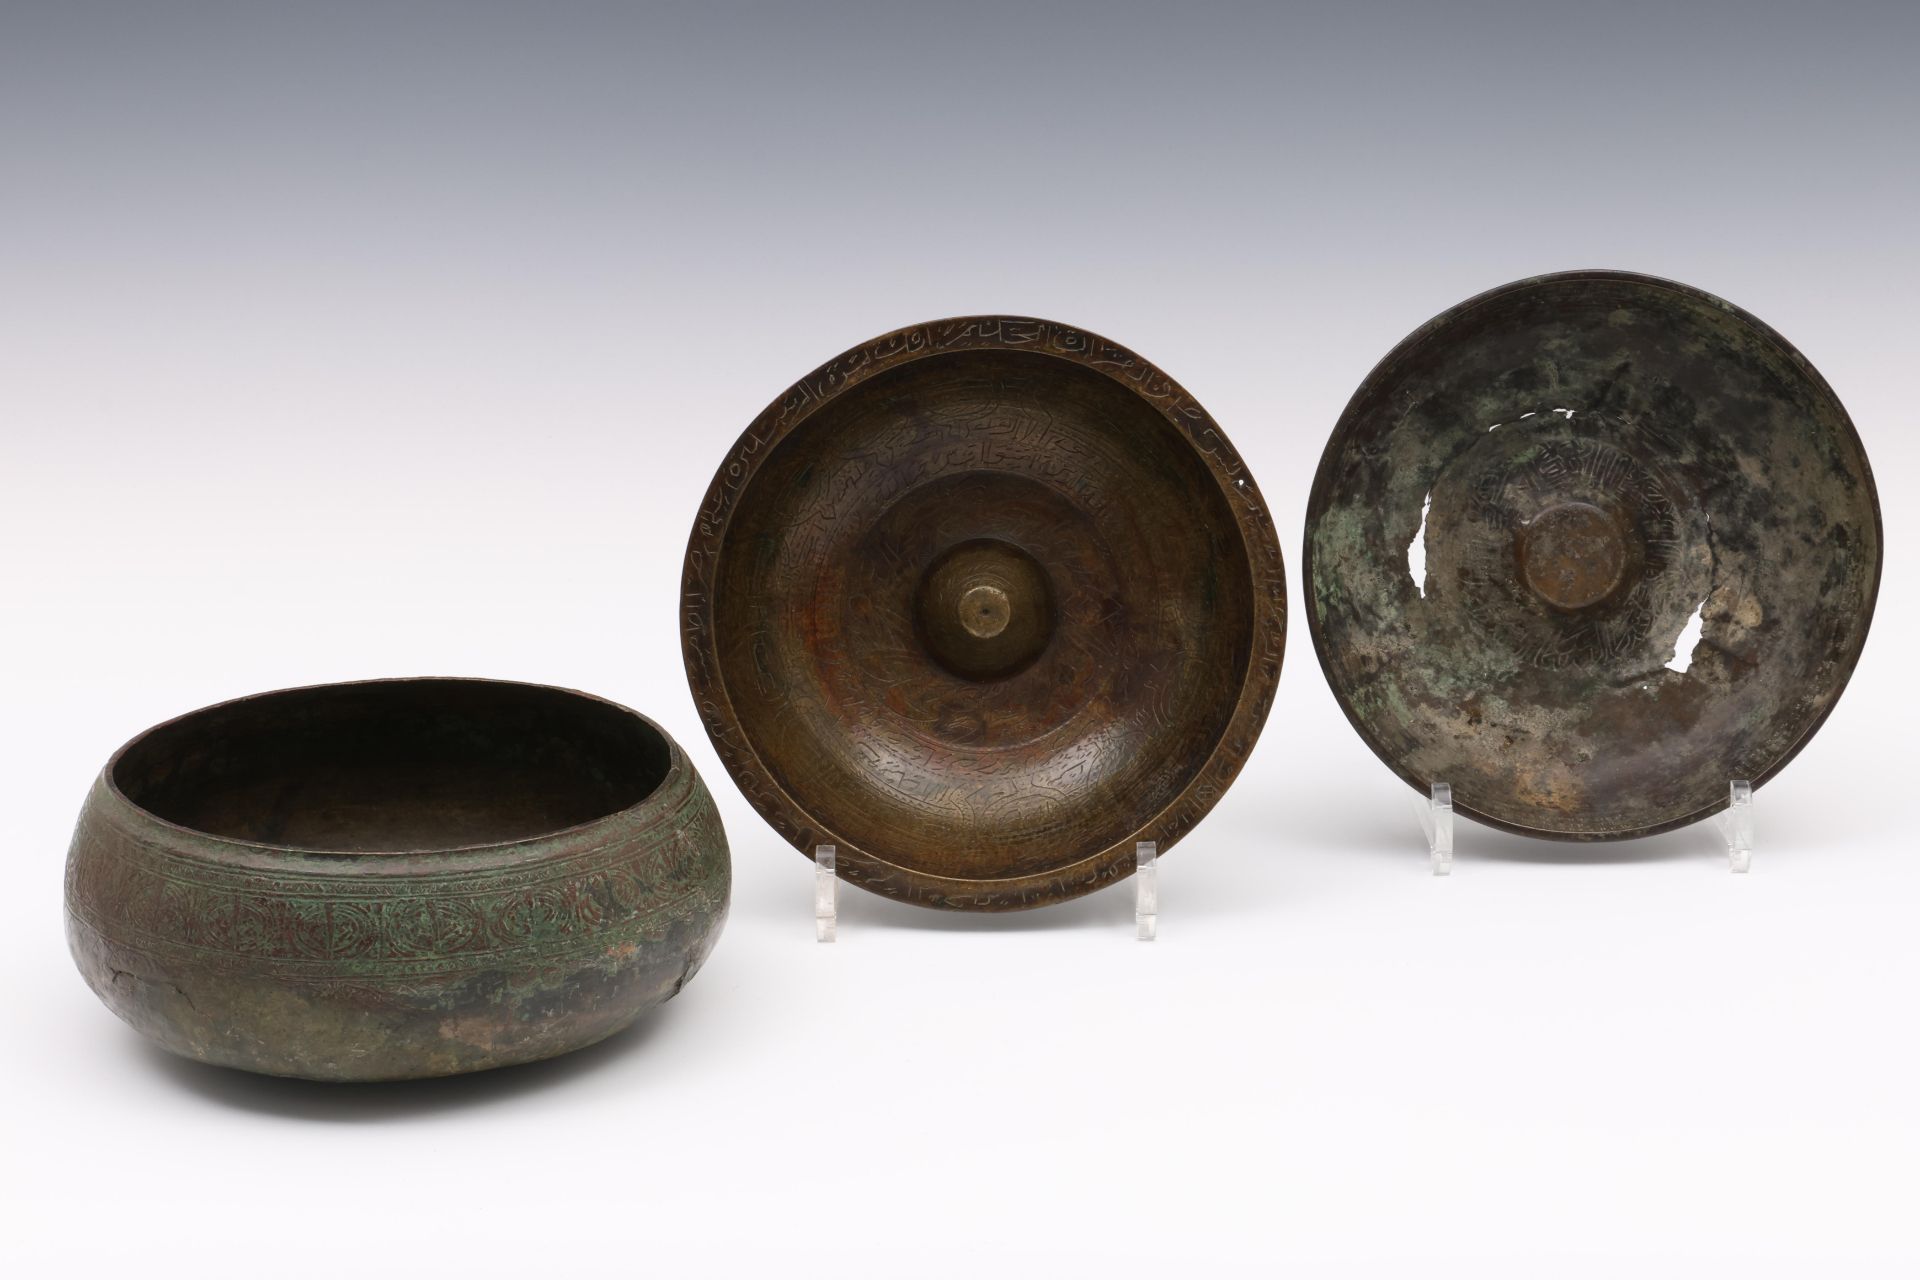 Persian bronze magic bowls; two bronze bowls with elevated middle, possibly Salavid, 17th century